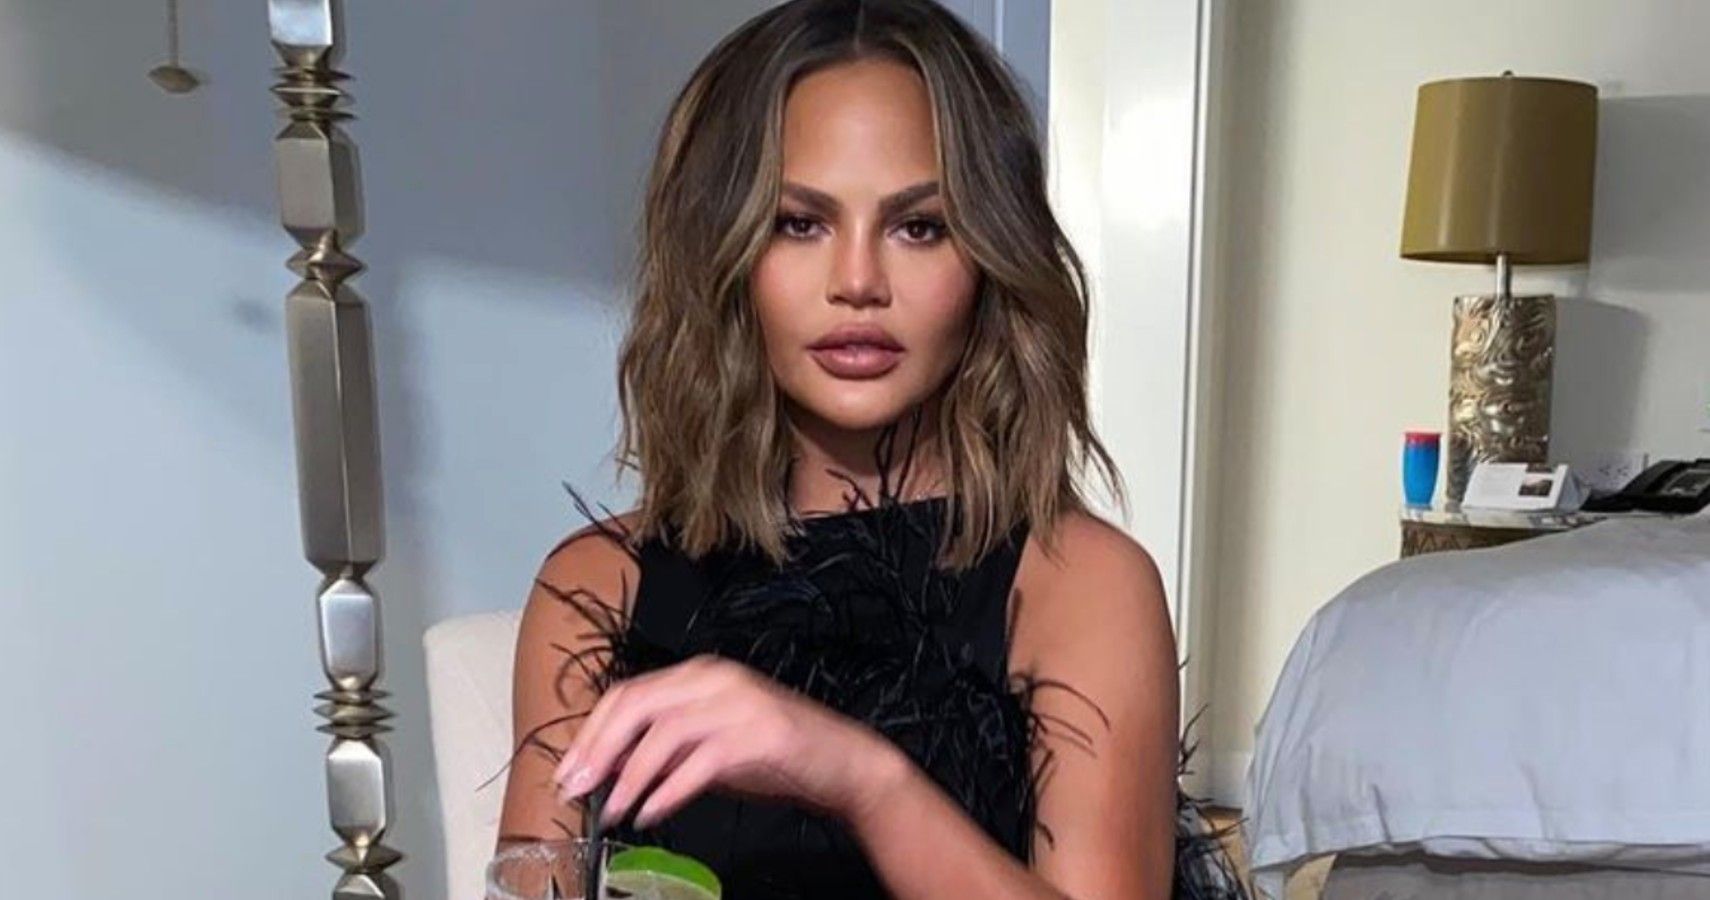 Chrissy Teigen Shows Off Baby Bump While On Vacation